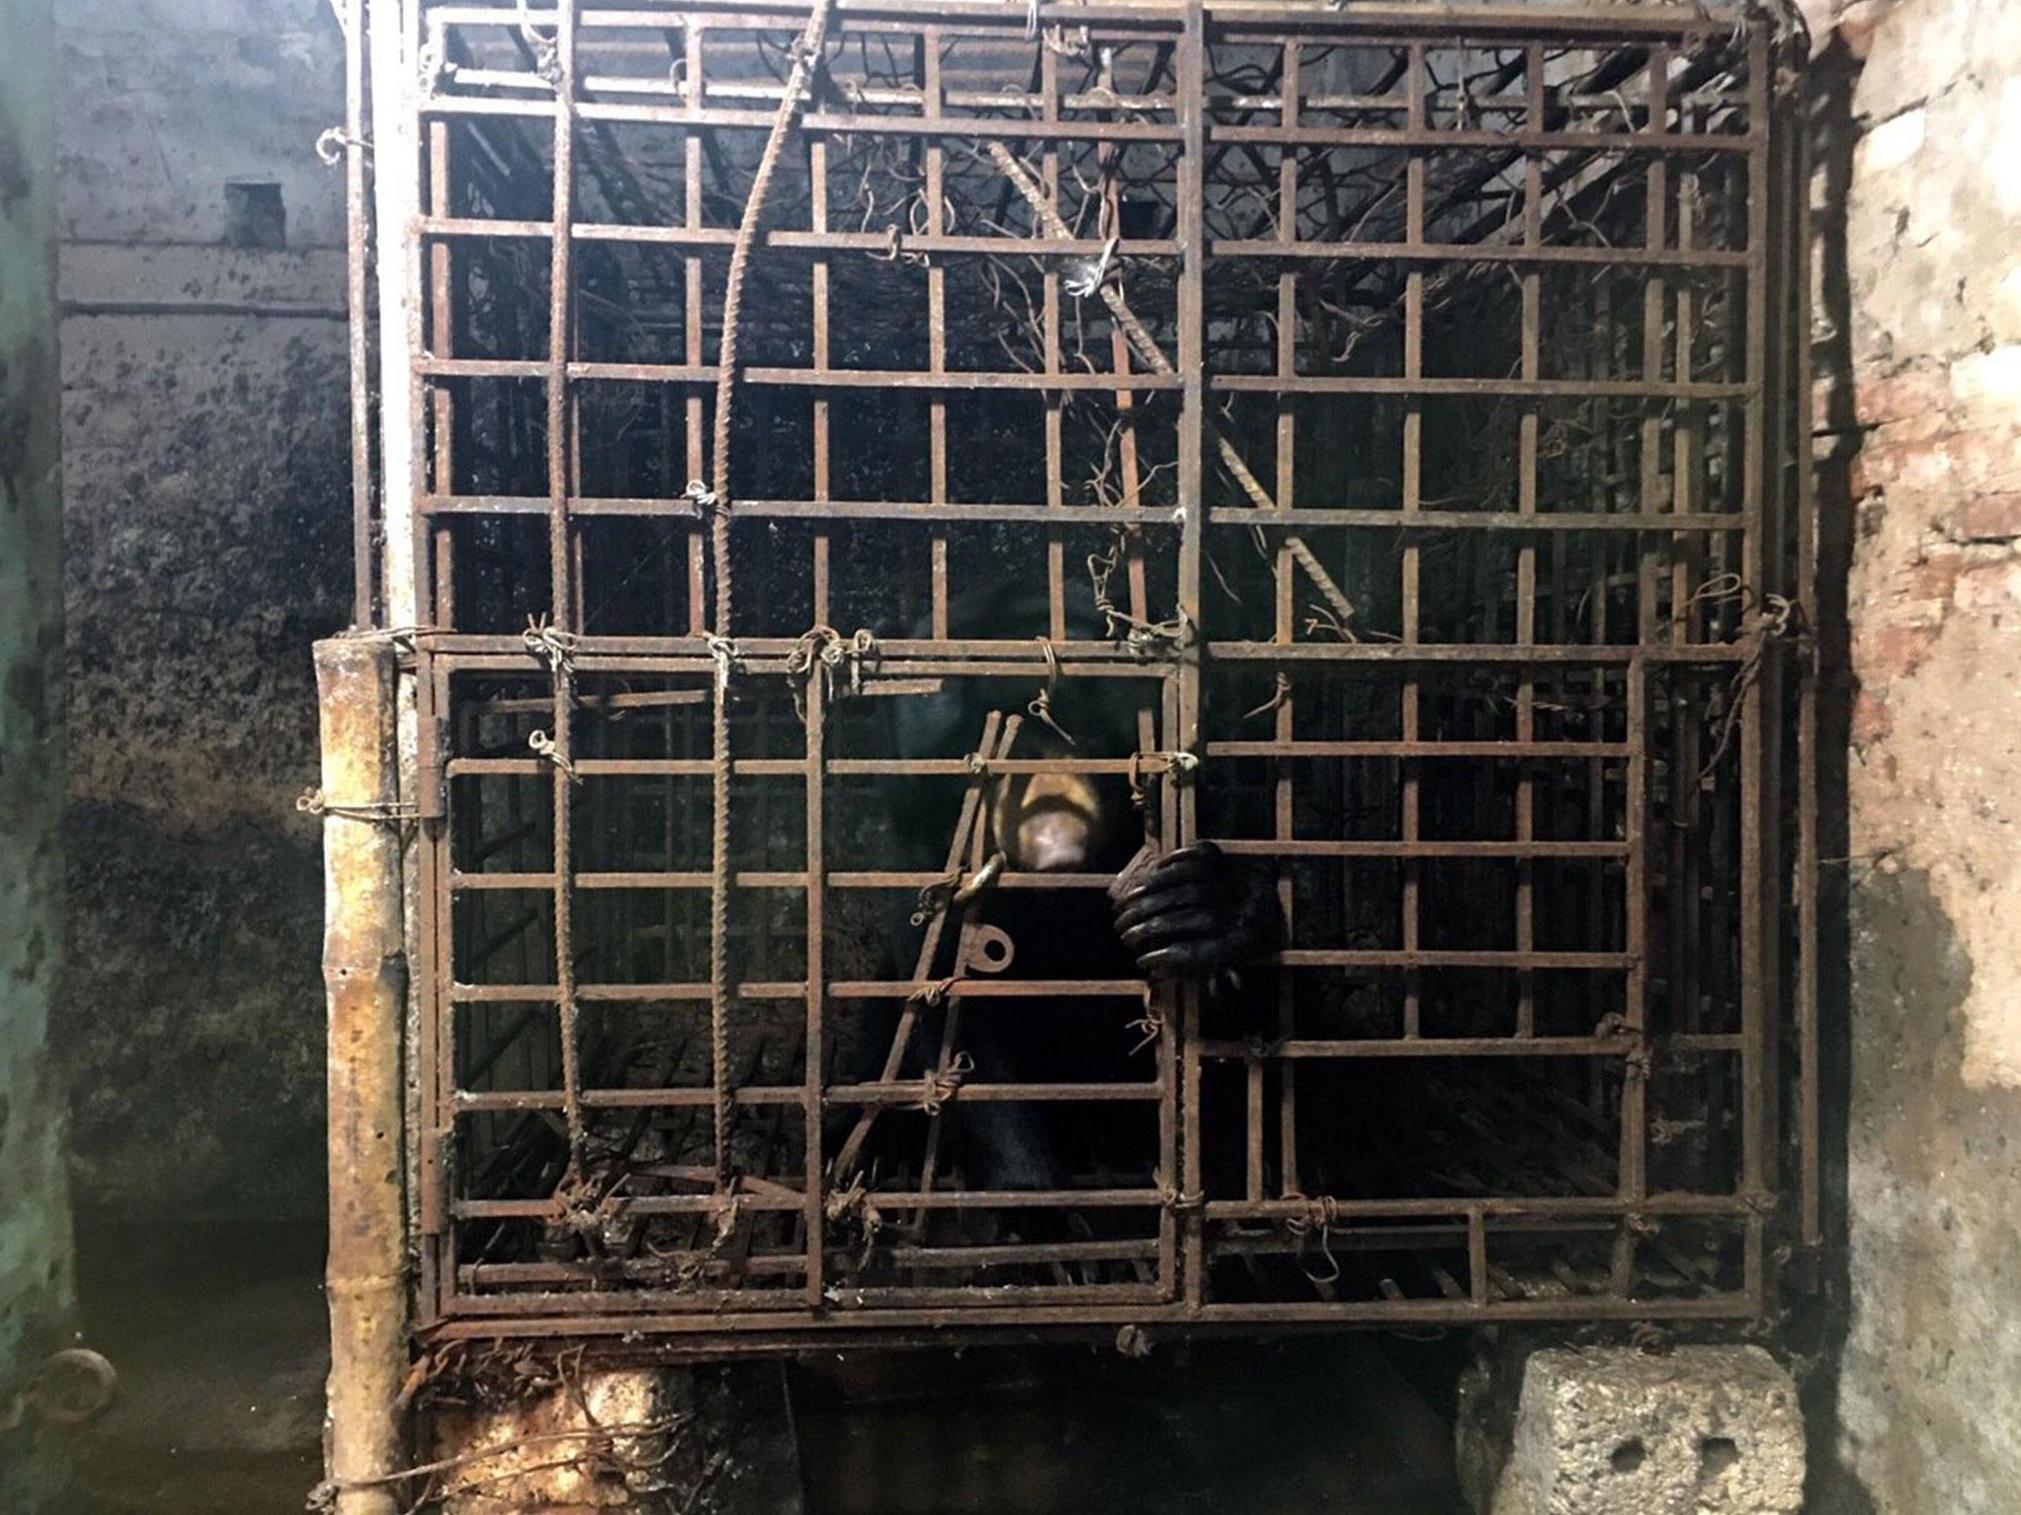 Farmed bears in China and Vietnam are kept for their whole lives in cages